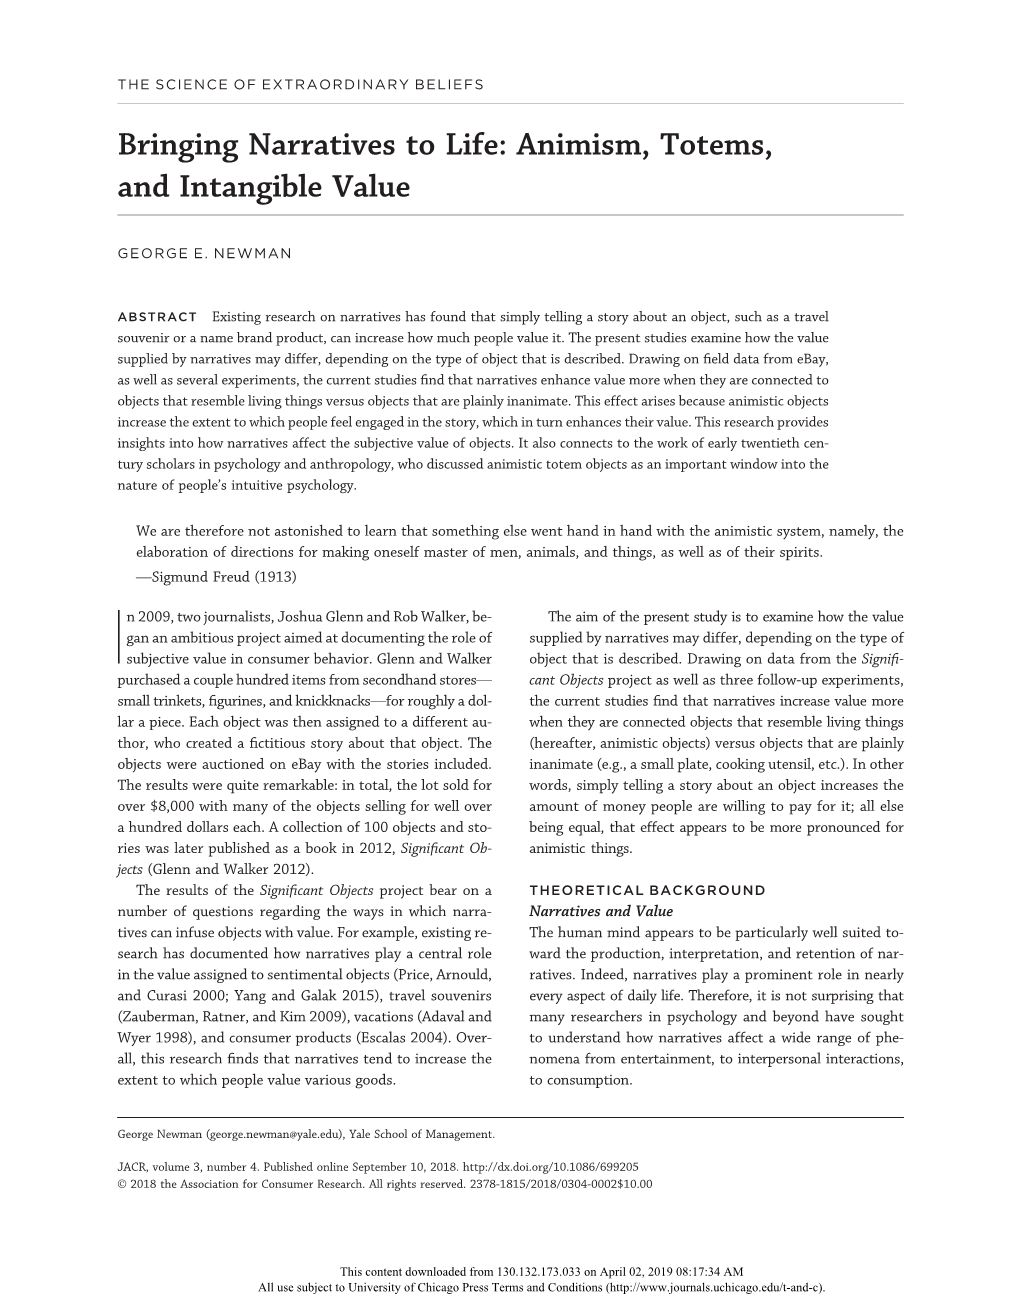 Bringing Narratives to Life: Animism, Totems, and Intangible Value